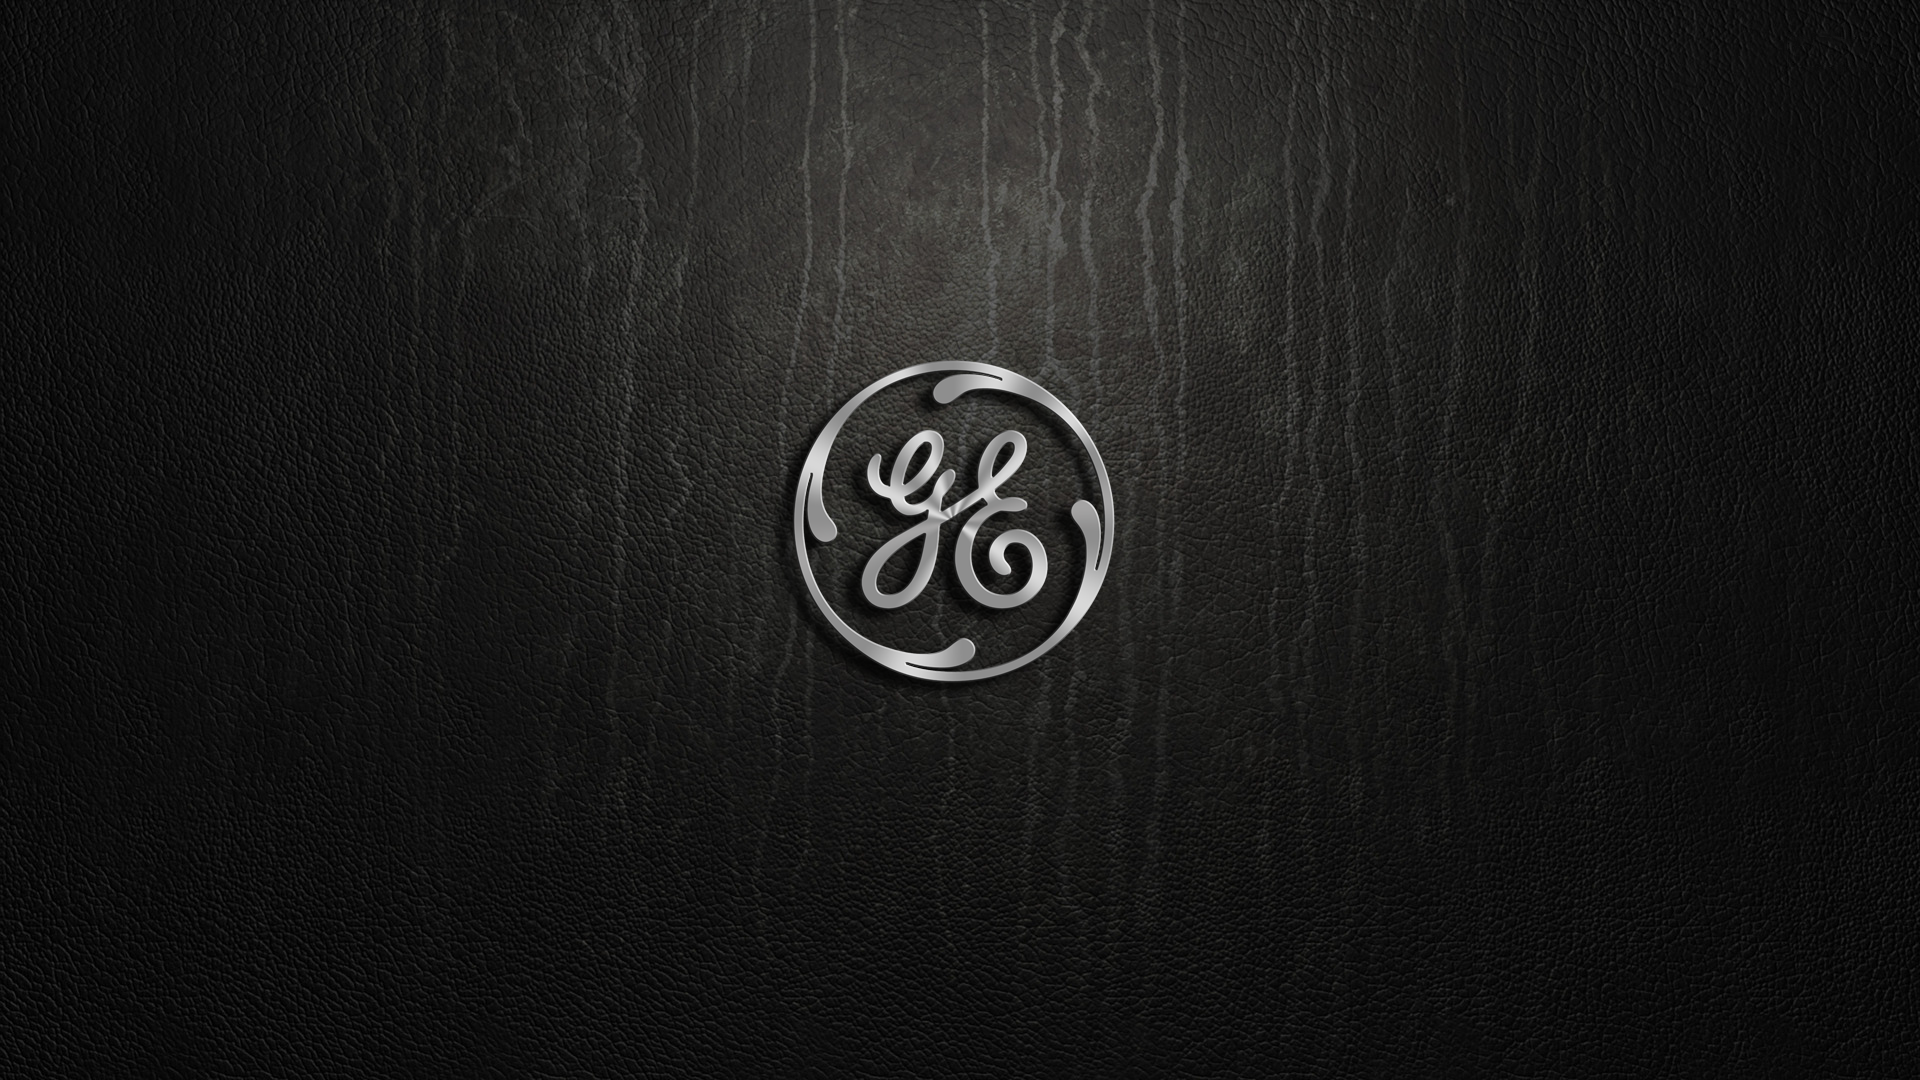 General Electric Wallpaper Free General Electric Background